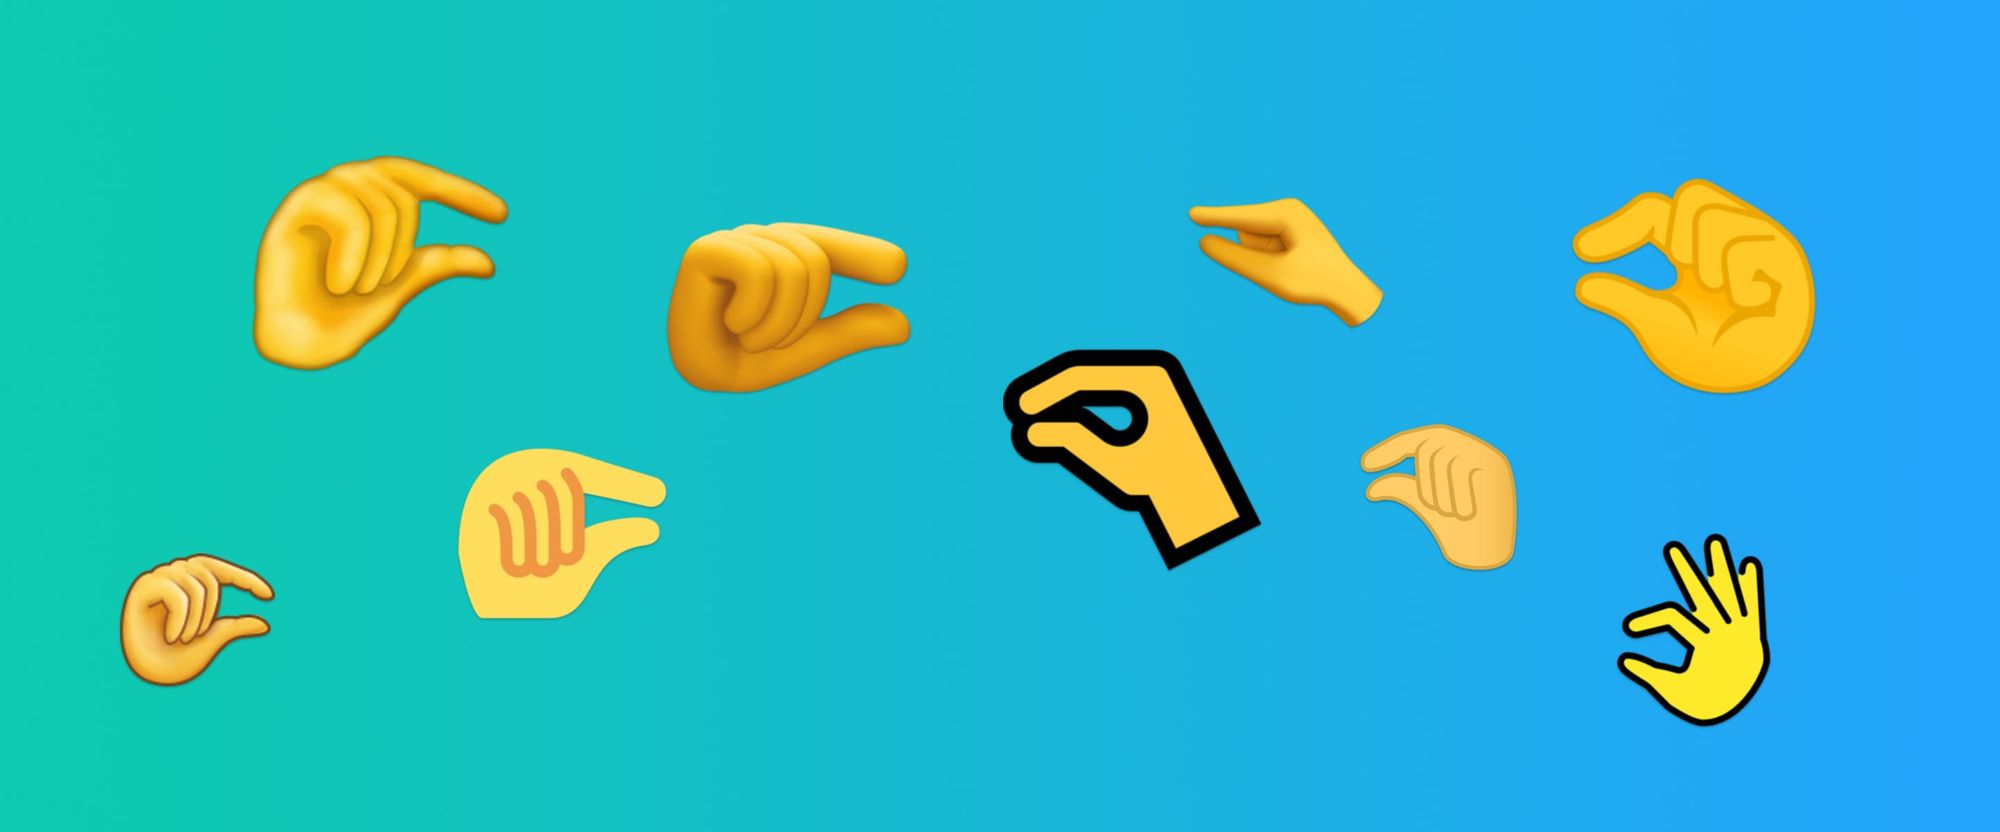 8 Widely Known Hand Gesture Emojis And Their Meanings